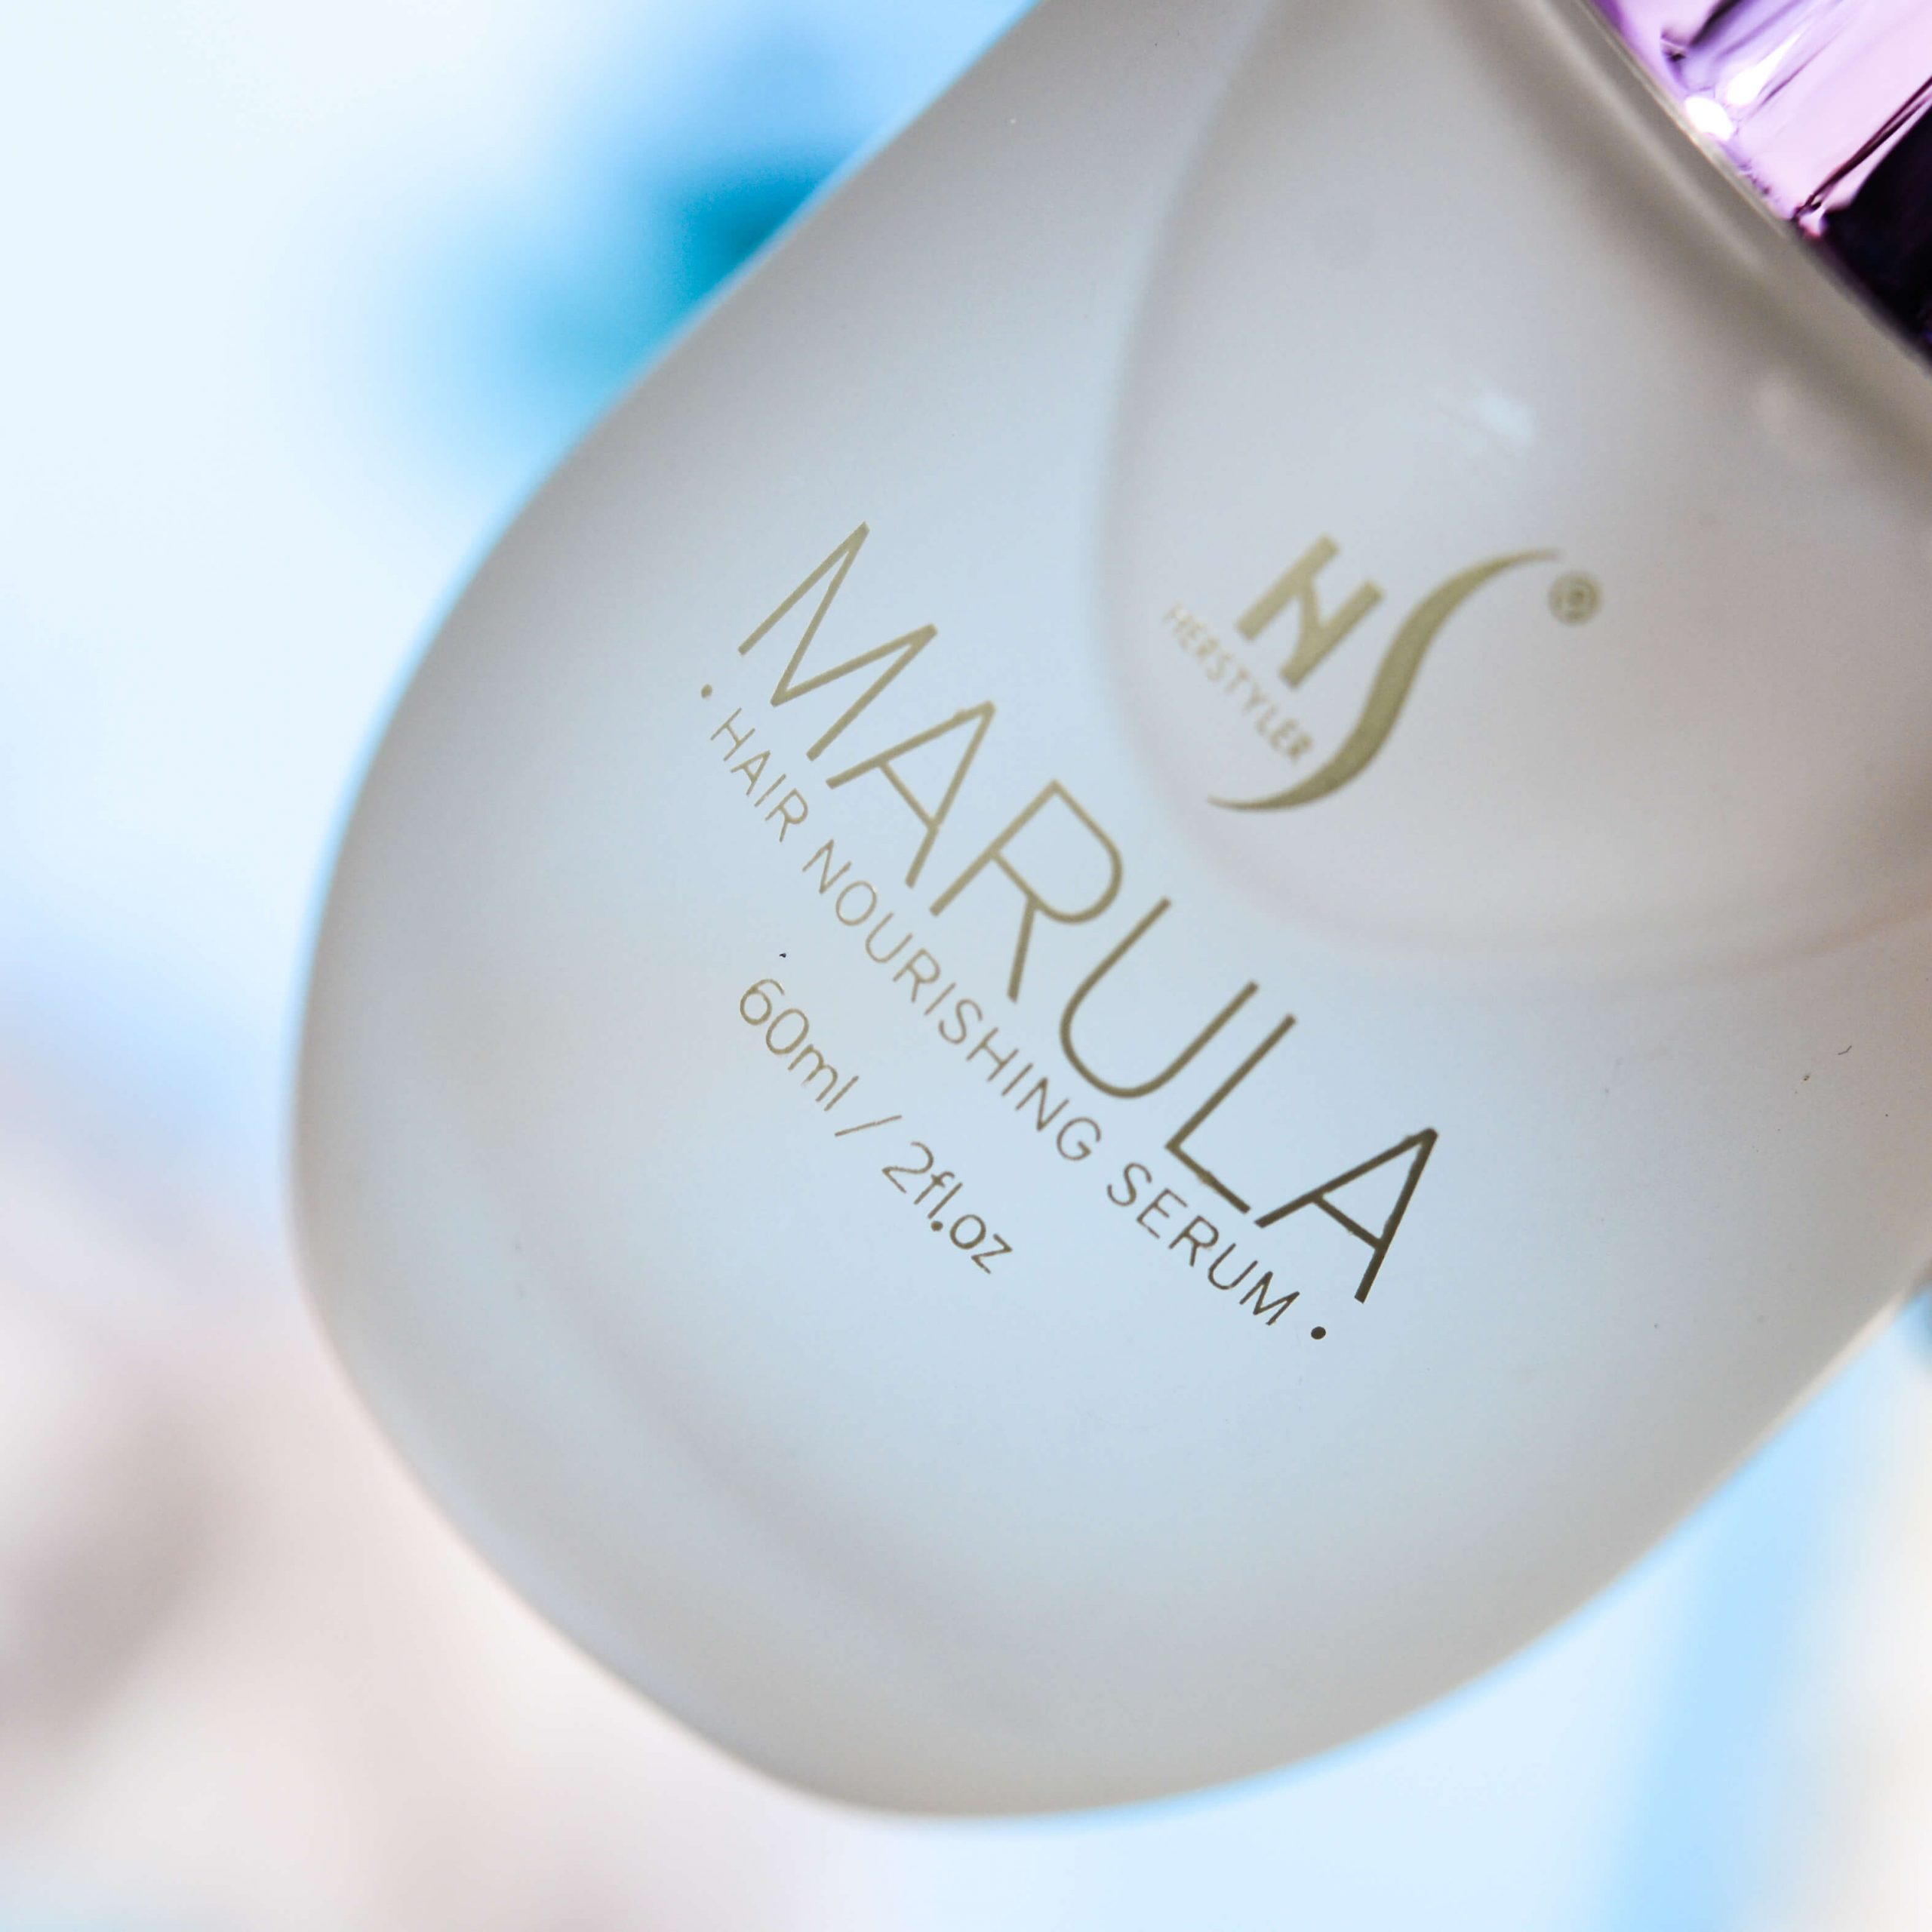 Marula Oil Serum to care for extensions